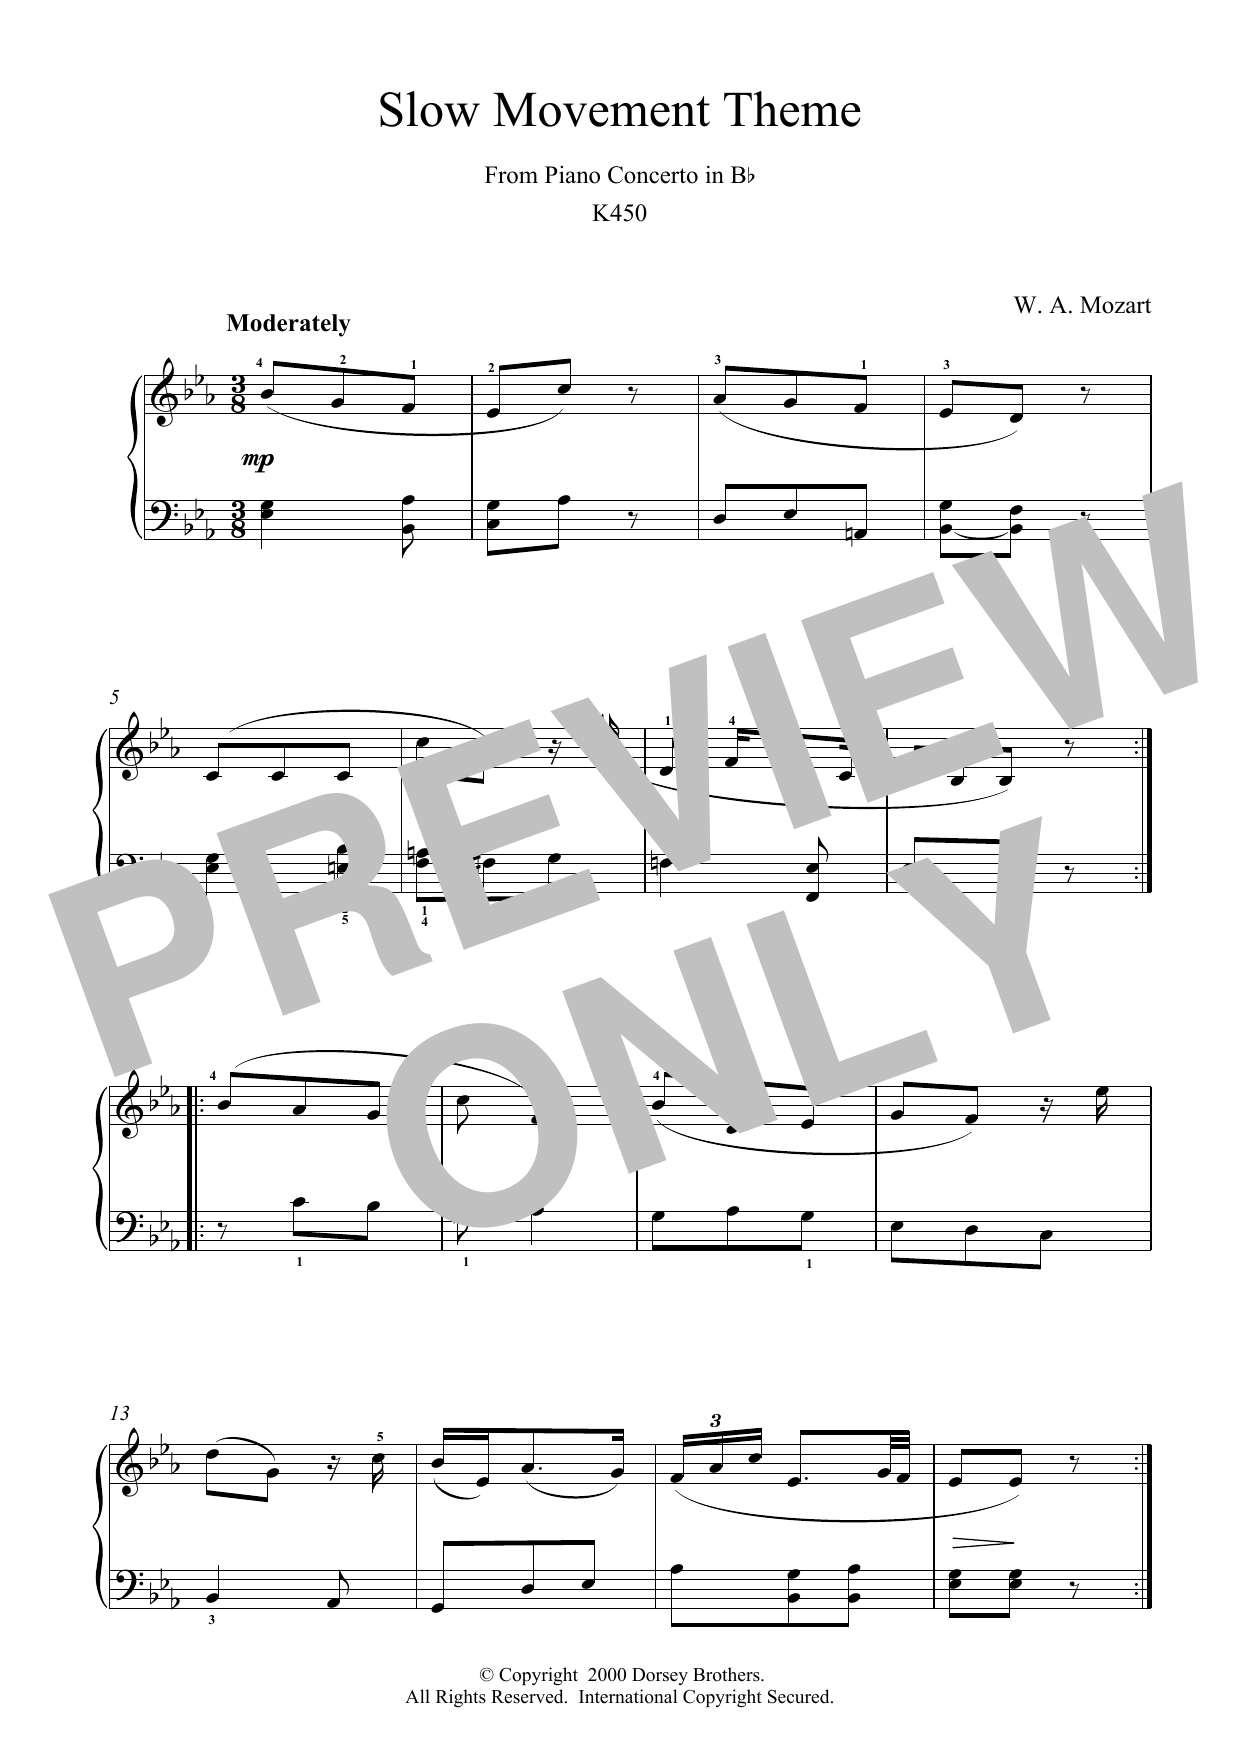 Download Wolfgang Amadeus Mozart Slow Movement Theme from Piano Concerto Sheet Music